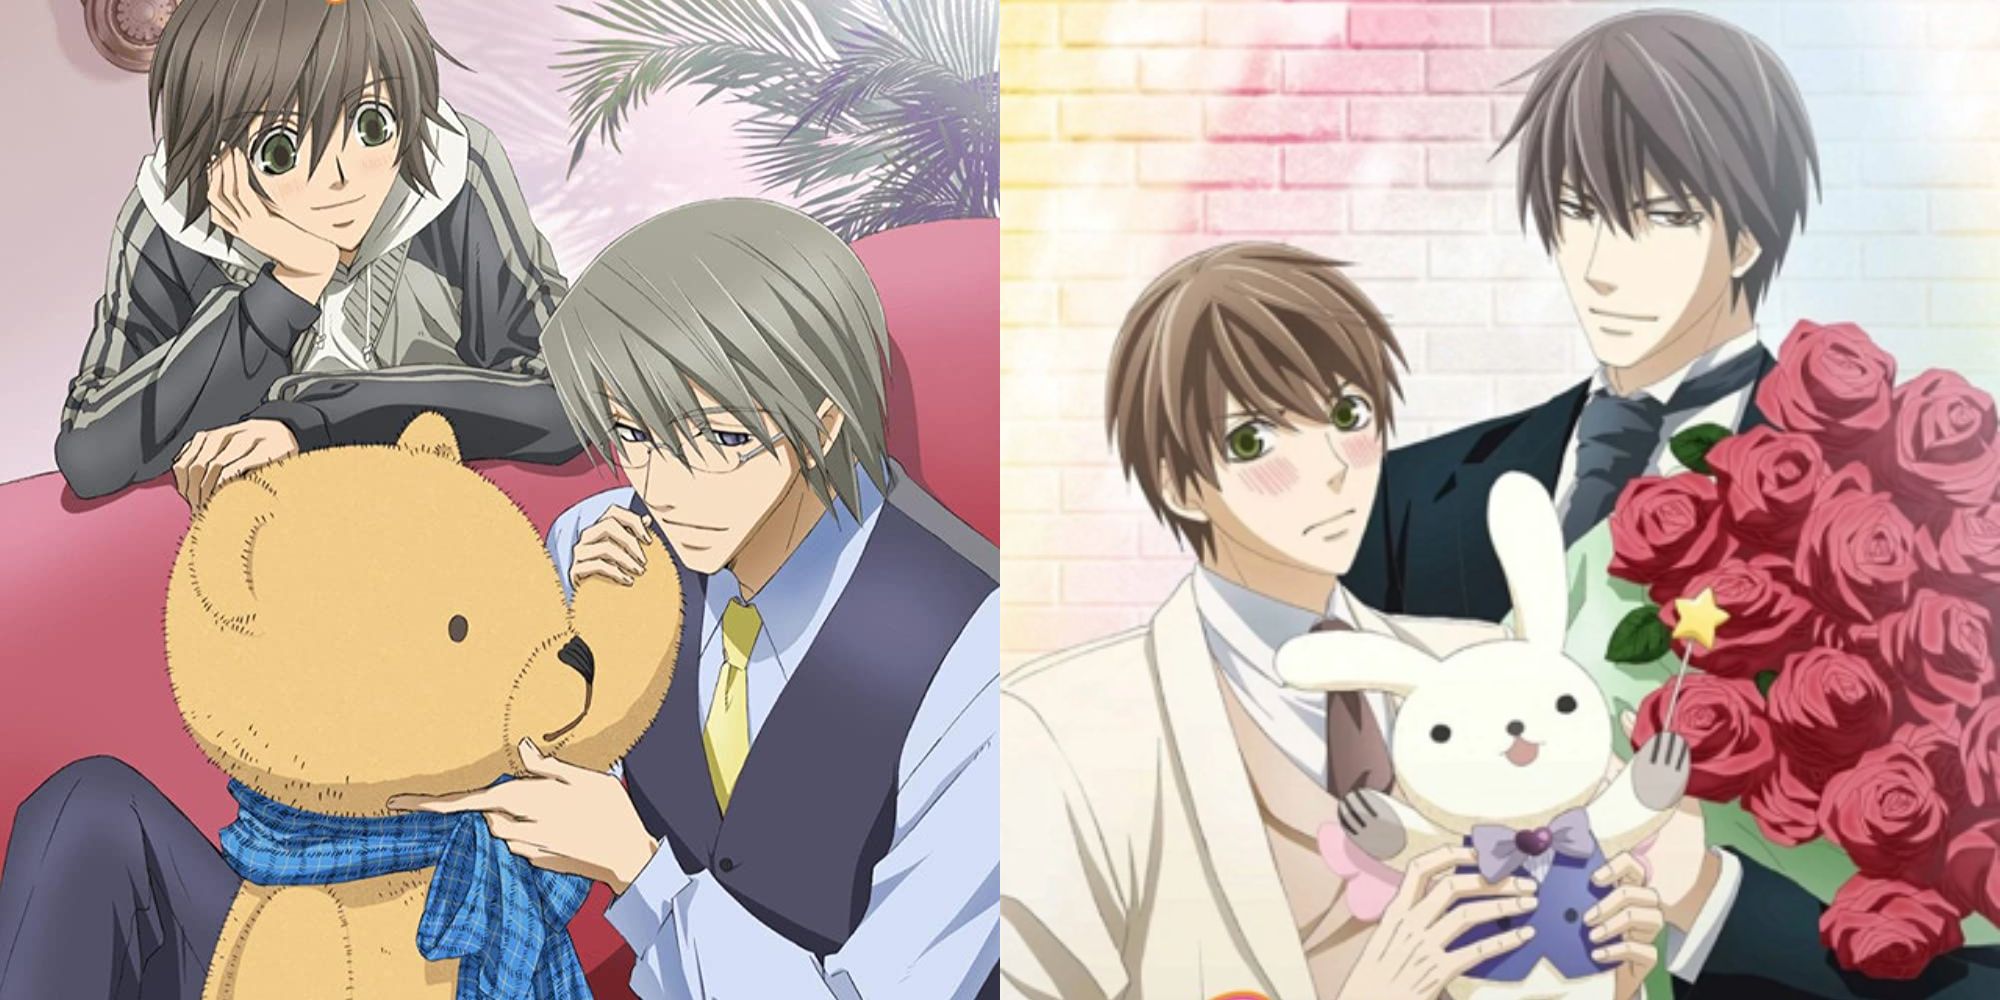 10 Best Yaoi Anime Series Of All Time, According To MyAnimeList